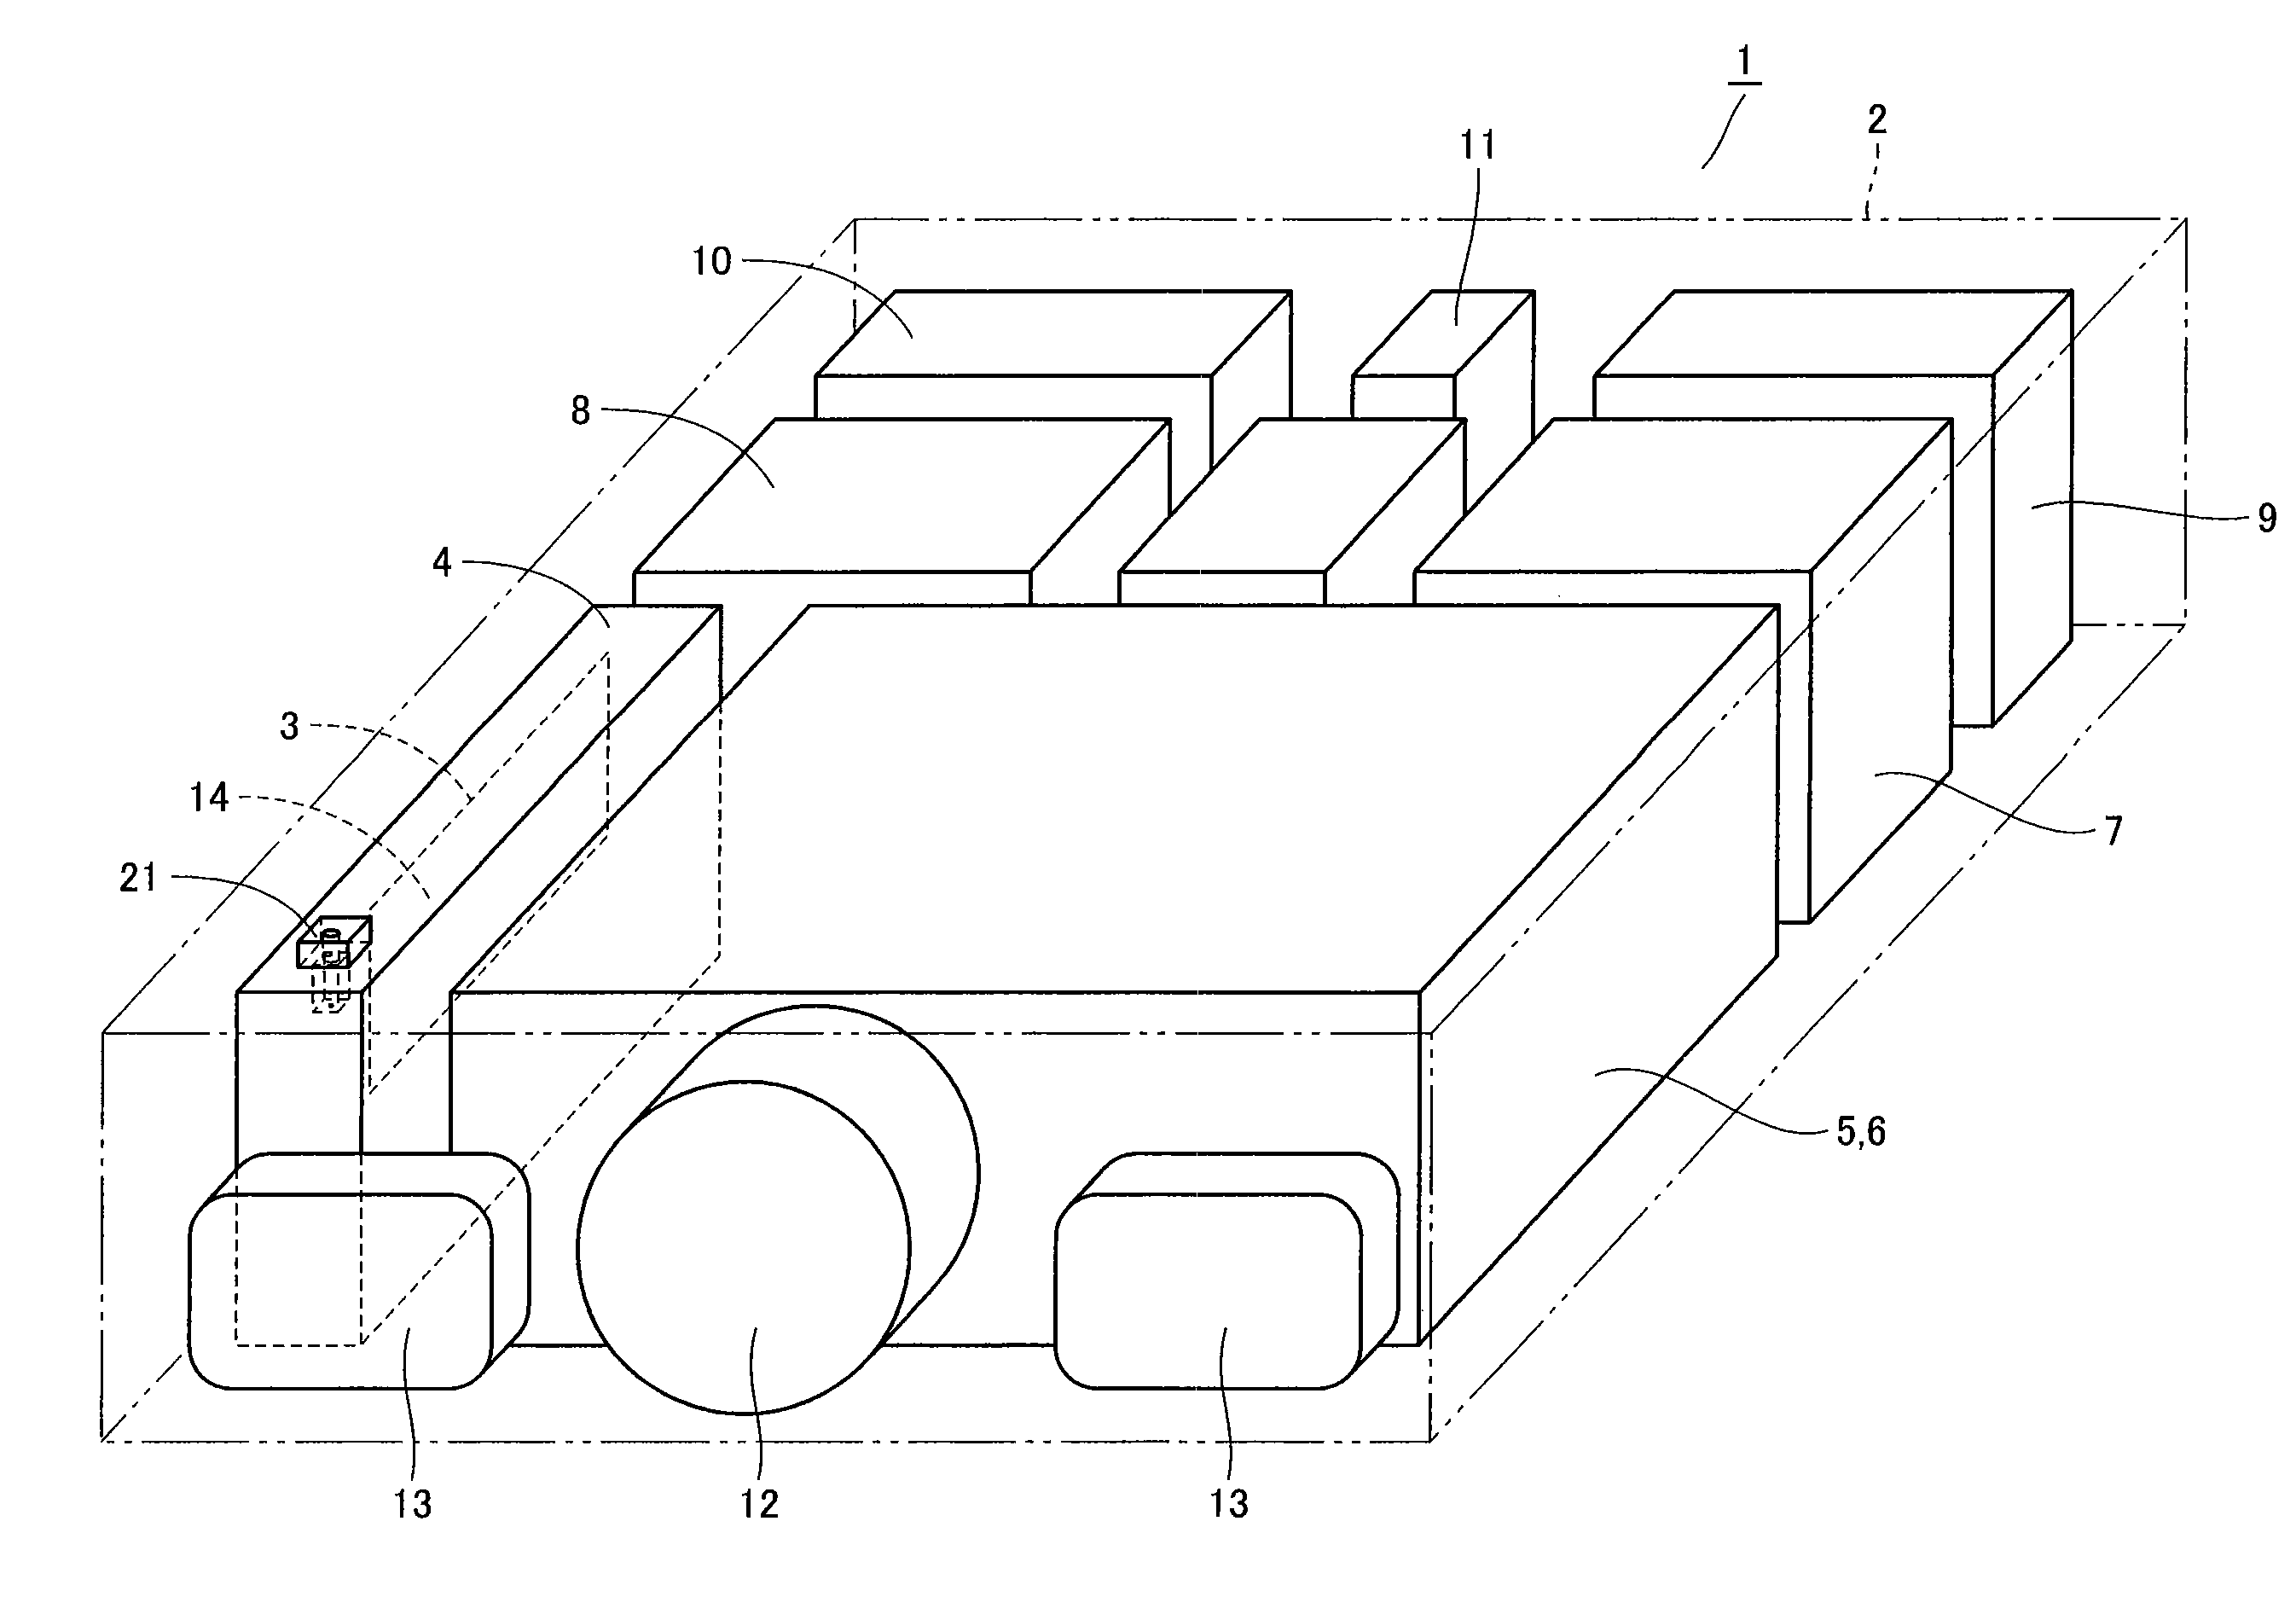 Installation structure of sensor and projector apparatus having the same